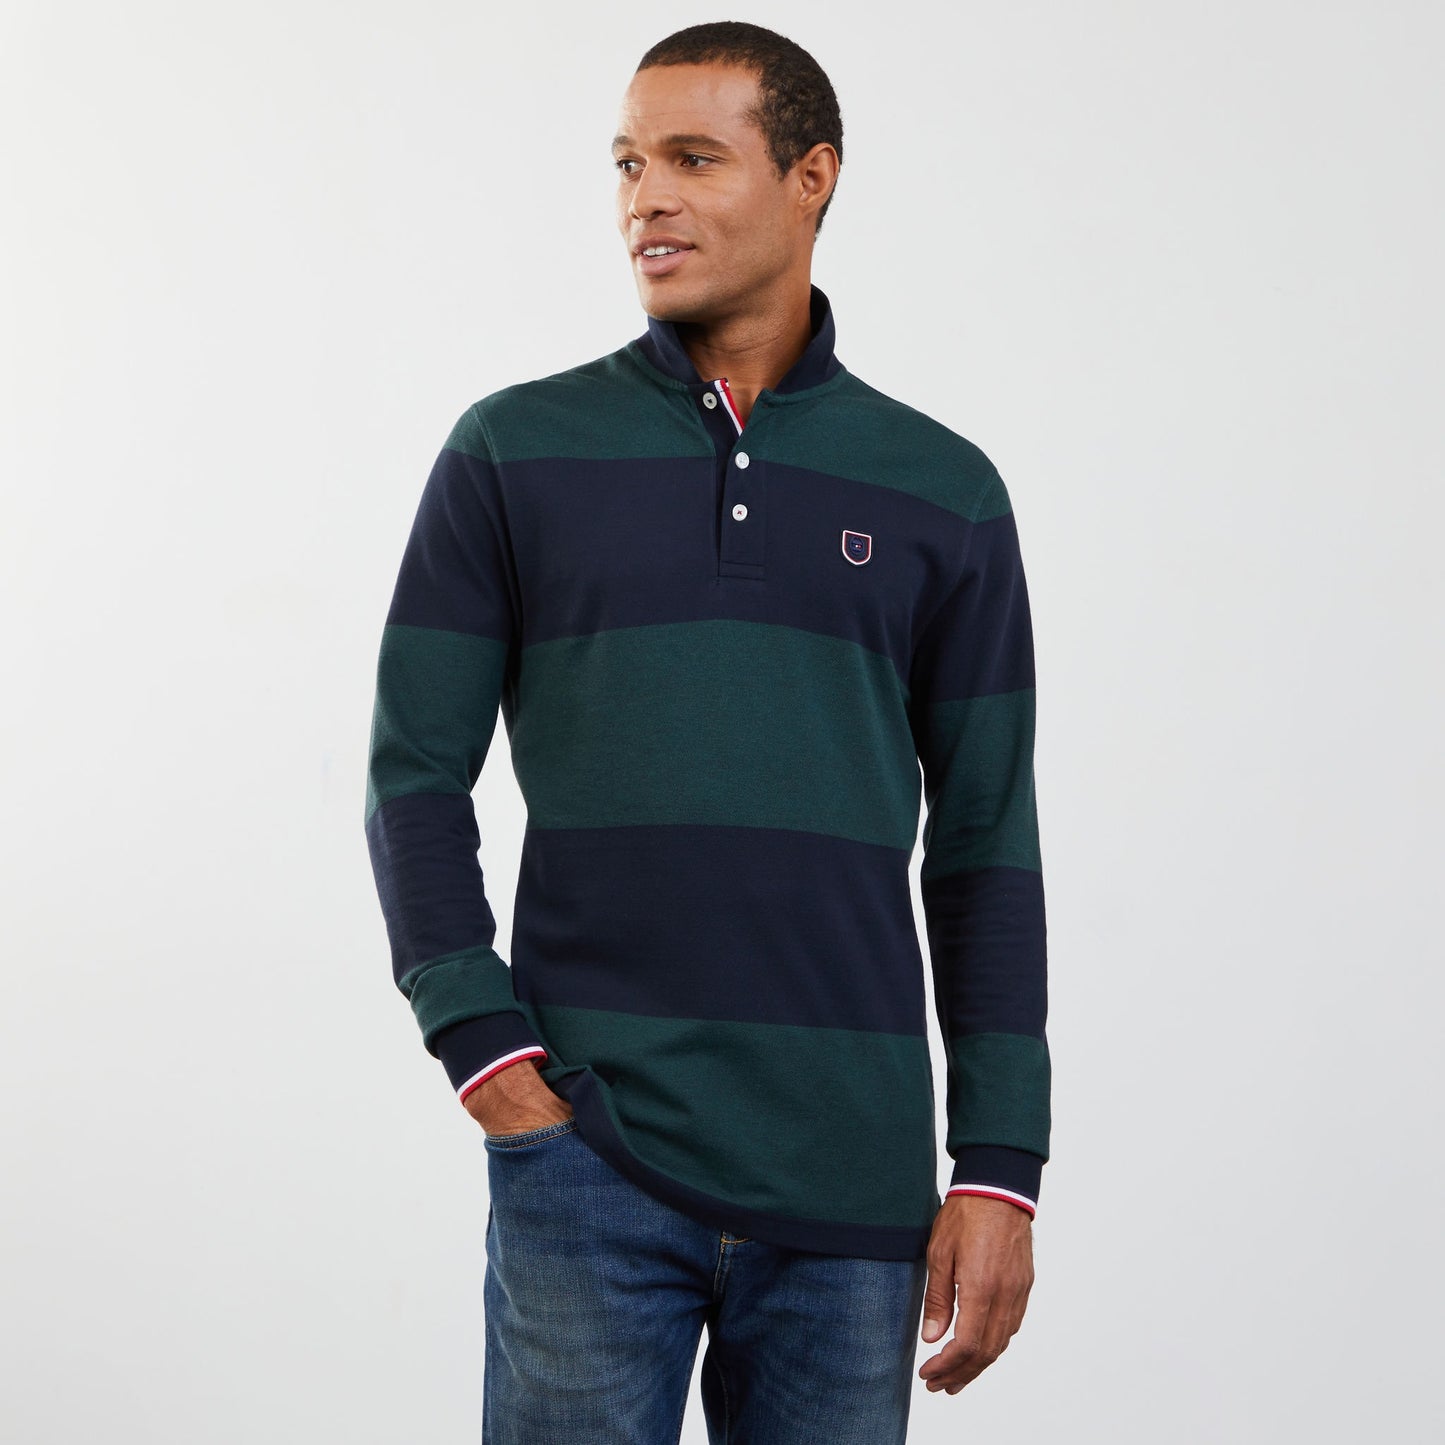 POLO MANCHES LONGUES SPORTSWEAR VERT Taille XL